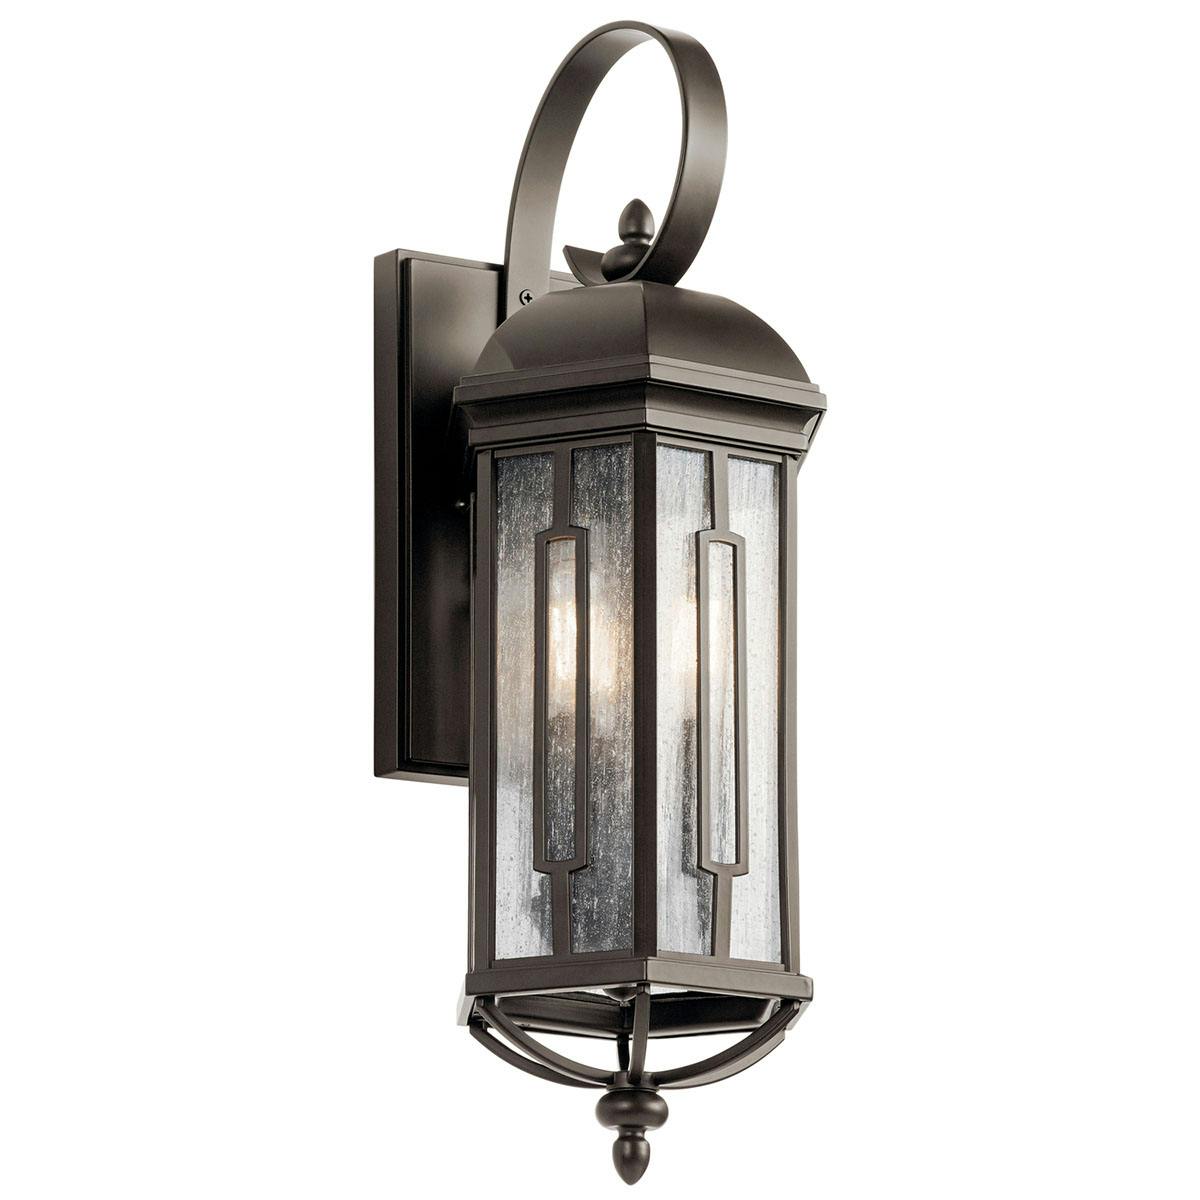 Galemore 3 Light Wall Light Olde Bronze on a white background